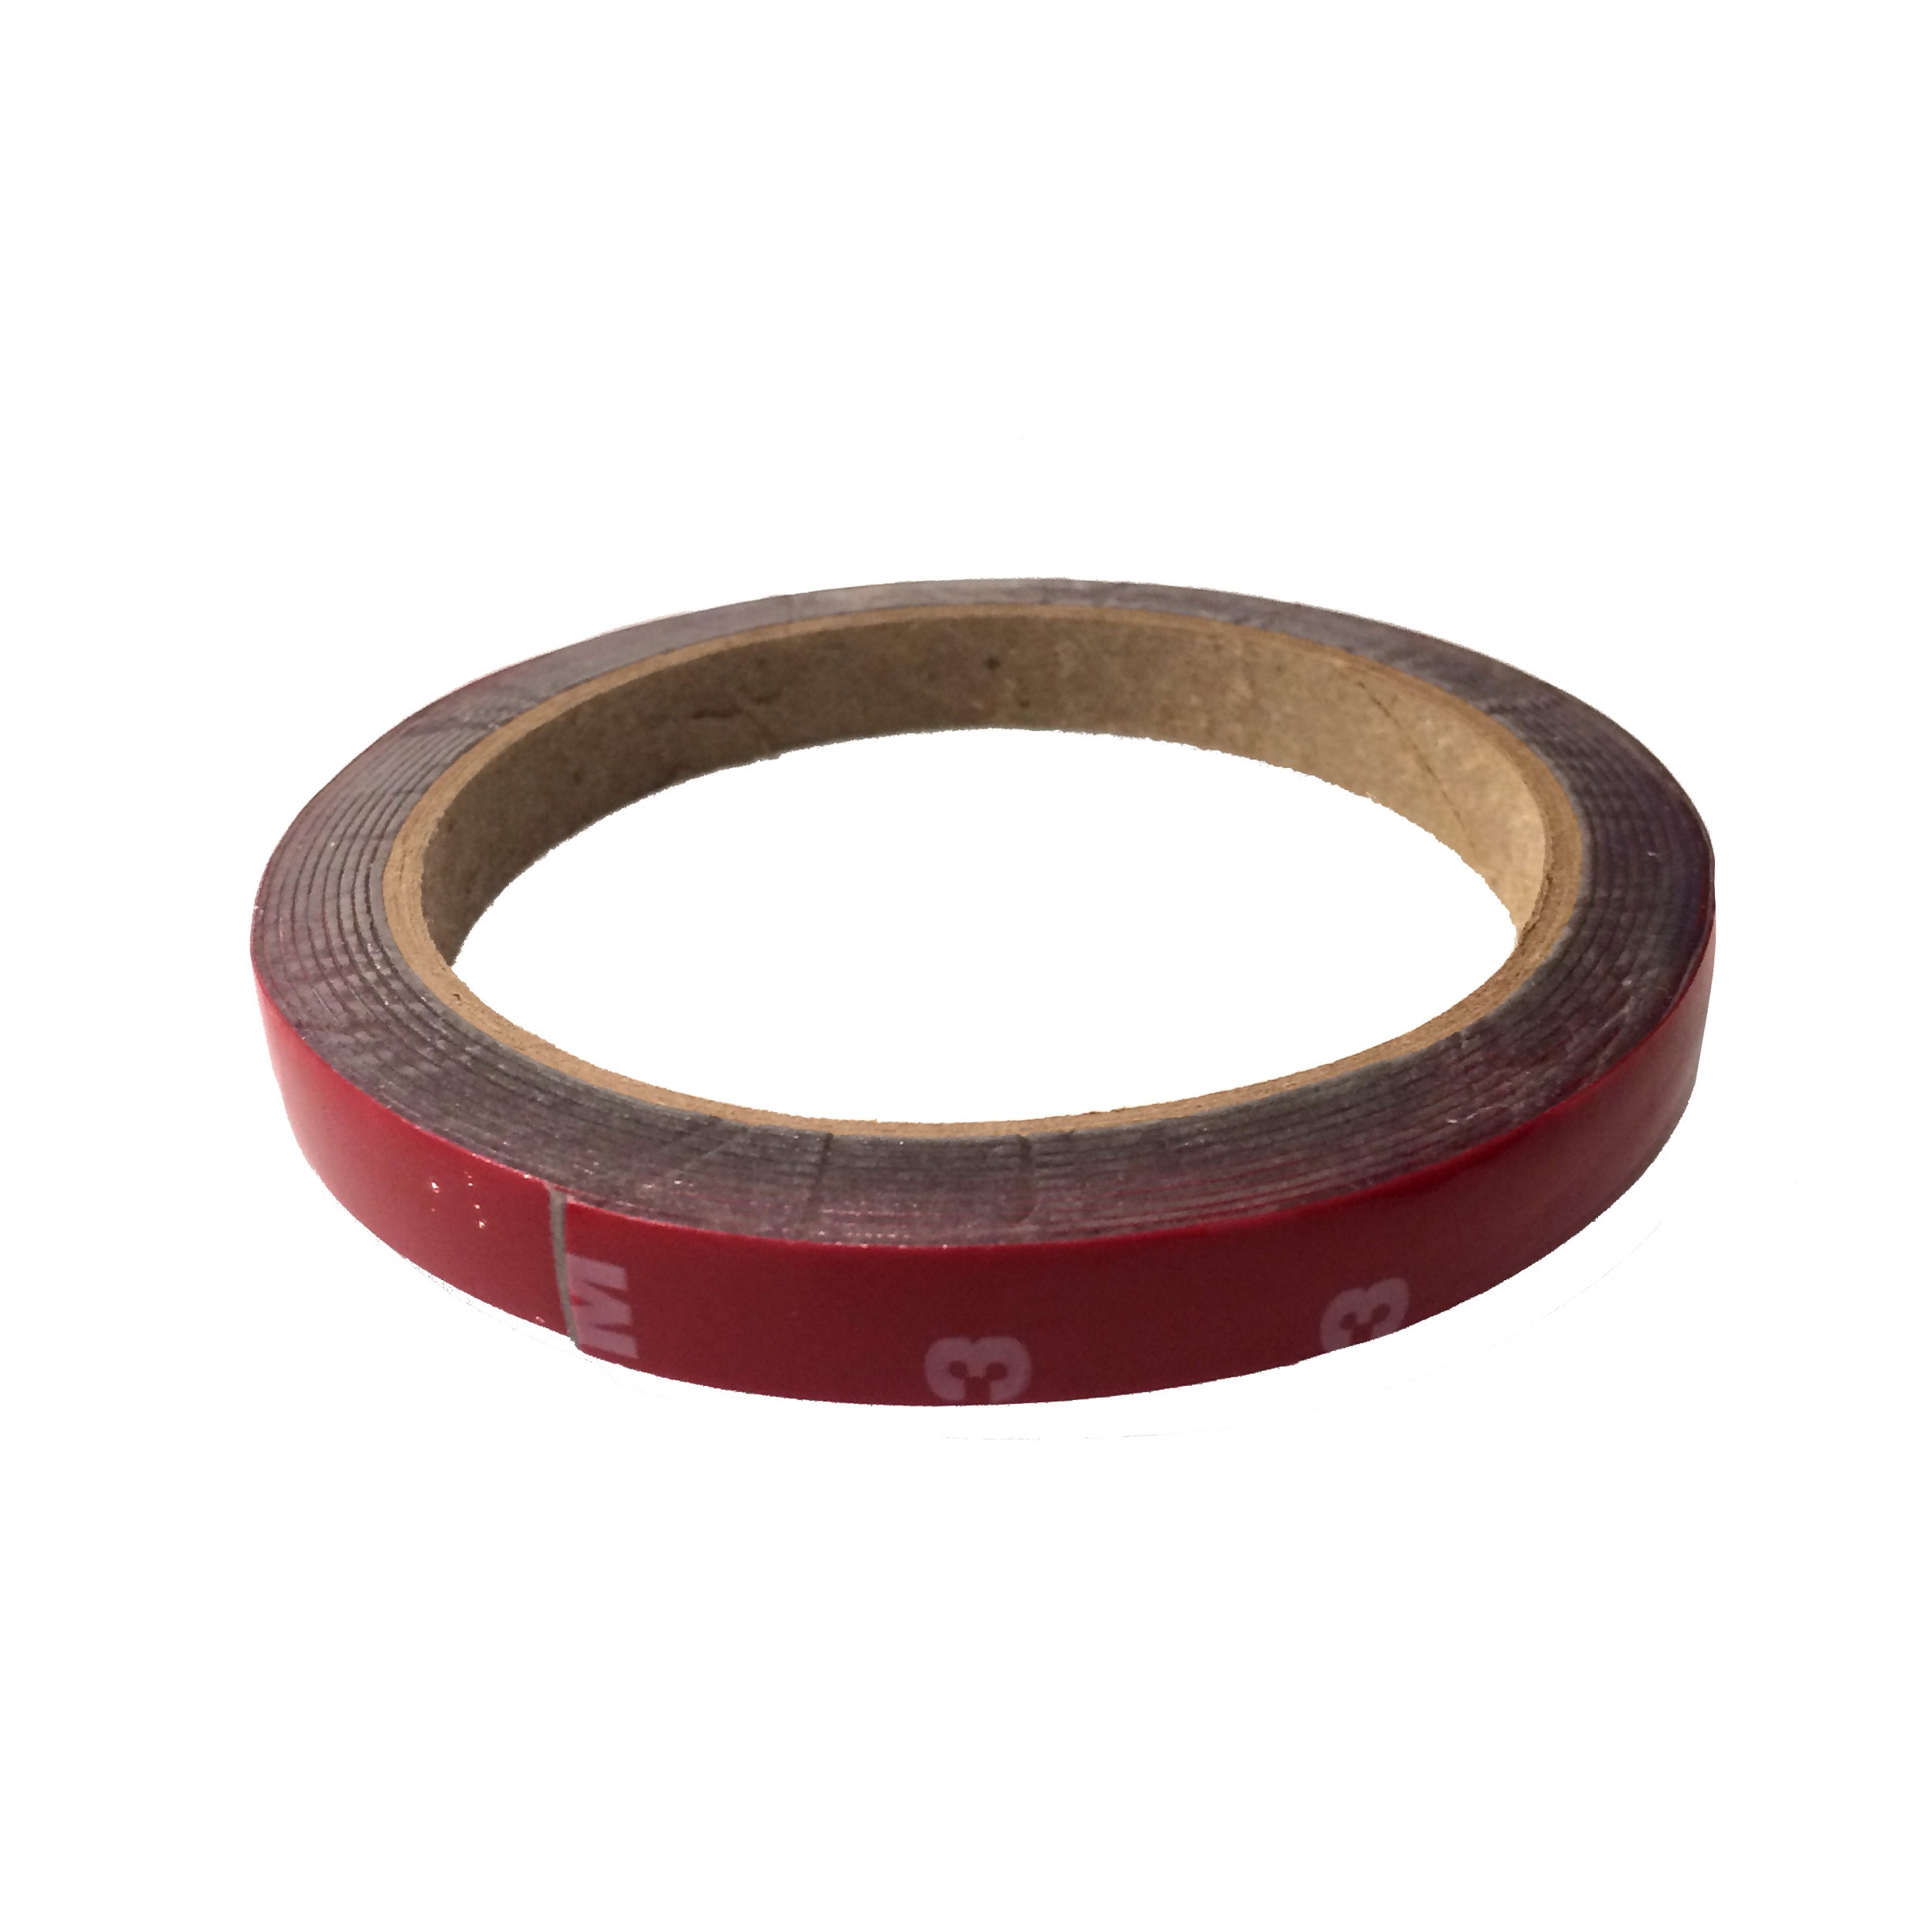 industrial two sided tape